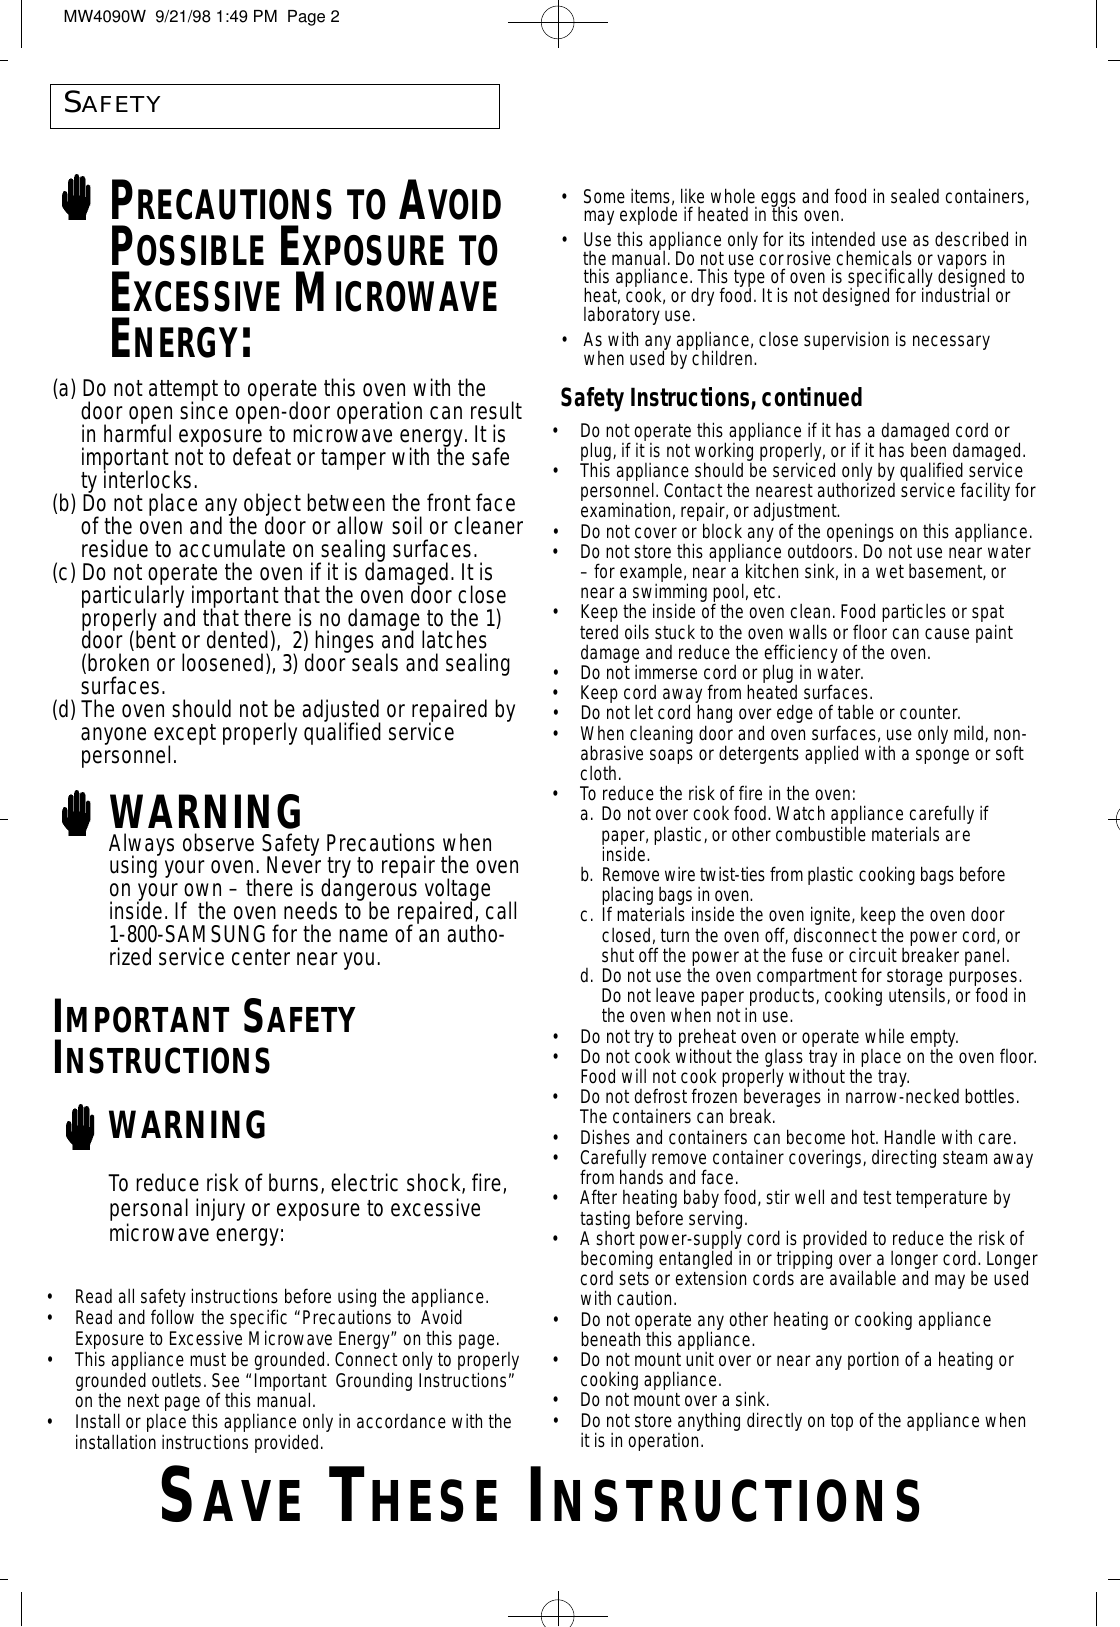 SAFETYPRECAUTIONS TO AVOIDPOSSIBLE EXPOSURE TOEXCESSIVE MICROWAVEENERGY:•Do not operate this appliance if it has a damaged cord or plug, if it is not working properly, or if it has been damaged.•This appliance should be serviced only by qualified service personnel. Contact the nearest authorized service facility forexamination, repair, or adjustment.•Do not cover or block any of the openings on this appliance.•Do not store this appliance outdoors. Do not use near water – for example, near a kitchen sink, in a wet basement, or near a swimming pool, etc. •Keep the inside of the oven clean. Food particles or spattered oils stuck to the oven walls or floor can cause paint damage and reduce the efficiency of the oven.•Do not immerse cord or plug in water.•Keep cord away from heated surfaces.•Do not let cord hang over edge of table or counter.•When cleaning door and oven surfaces, use only mild, non-abrasive soaps or detergents applied with a sponge or soft cloth.• To reduce the risk of fire in the oven:a. Do not over cook food. Watch appliance carefully if paper, plastic, or other combustible materials areinside.b . Remove wire twist-ties from plastic cooking bags before placing bags in oven.c. If materials inside the oven ignite, keep the oven door closed, turn the oven off, disconnect the power cord, or shut off the power at the fuse or circuit breaker panel.d. Do not use the oven compartment for storage purposes. Do not leave paper products, cooking utensils, or food in the oven when not in use.•Do not try to preheat oven or operate while empty.•Do not cook without the glass tray in place on the oven floor.Food will not cook properly without the tray.•Do not defrost frozen beverages in narrow-necked bottles. The containers can break.•Dishes and containers can become hot. Handle with care.•Carefully remove container coverings, directing steam awayfrom hands and face.•After heating baby food, stir well and test temperature by tasting before serving.•A short power-supply cord is provided to reduce the risk of becoming entangled in or tripping over a longer cord. Longercord sets or extension cords are available and may be used with caution.  •Do not operate any other heating or cooking appliance beneath this appliance.•Do not mount unit over or near any portion of a heating or cooking appliance.• Do not mount over a sink.•Do not store anything directly on top of the appliance when it is in operation.(a) Do not attempt to operate this oven with the door open since open-door operation can resultin harmful exposure to microwave energy. It is important not to defeat or tamper with the safety interlocks.(b) Do not place any object between the front face of the oven and the door or allow soil or cleanerresidue to accumulate on sealing surfaces.(c) Do not operate the oven if it is damaged. It is particularly important that the oven door close properly and that there is no damage to the 1) door (bent or dented),  2) hinges and latches (broken or loosened), 3) door seals and sealing surfaces.(d) The oven should not be adjusted or repaired by anyone except properly qualified service personnel.WARNINGAlways observe Safety Precautions whenusing your oven. Never try to repair the ovenon your own – there is dangerous voltageinside. If  the oven needs to be repaired, call1-800-SAMSUNG for the name of an autho-rized service center near you.IMPORTANT SAFETYINSTRUCTIONSWARNING•Some items, like whole eggs and food in sealed containers,may explode if heated in this oven.•Use this appliance only for its intended use as described inthe manual. Do not use corrosive chemicals or vapors inthis appliance. This type of oven is specifically designed toheat, cook, or dry food. It is not designed for industrial orlaboratory use.•As with any appliance, close supervision is necessarywhen used by children.Safety Instructions, continuedTo reduce risk of burns, electric shock, fire,personal injury or exposure to excessivemicrowave energy:•Read all safety instructions before using the appliance.•Read and follow the specific “Precautions to  Avoid Exposure to Excessive Microwave Energy” on this page.•This appliance must be grounded. Connect only to properlygrounded outlets. See “Important  Grounding Instructions”on the next page of this manual.  •Install or place this appliance only in accordance with the installation instructions provided.SA V E TH E S E IN S T R U C T I O N SMW4090W  9/21/98 1:49 PM  Page 2